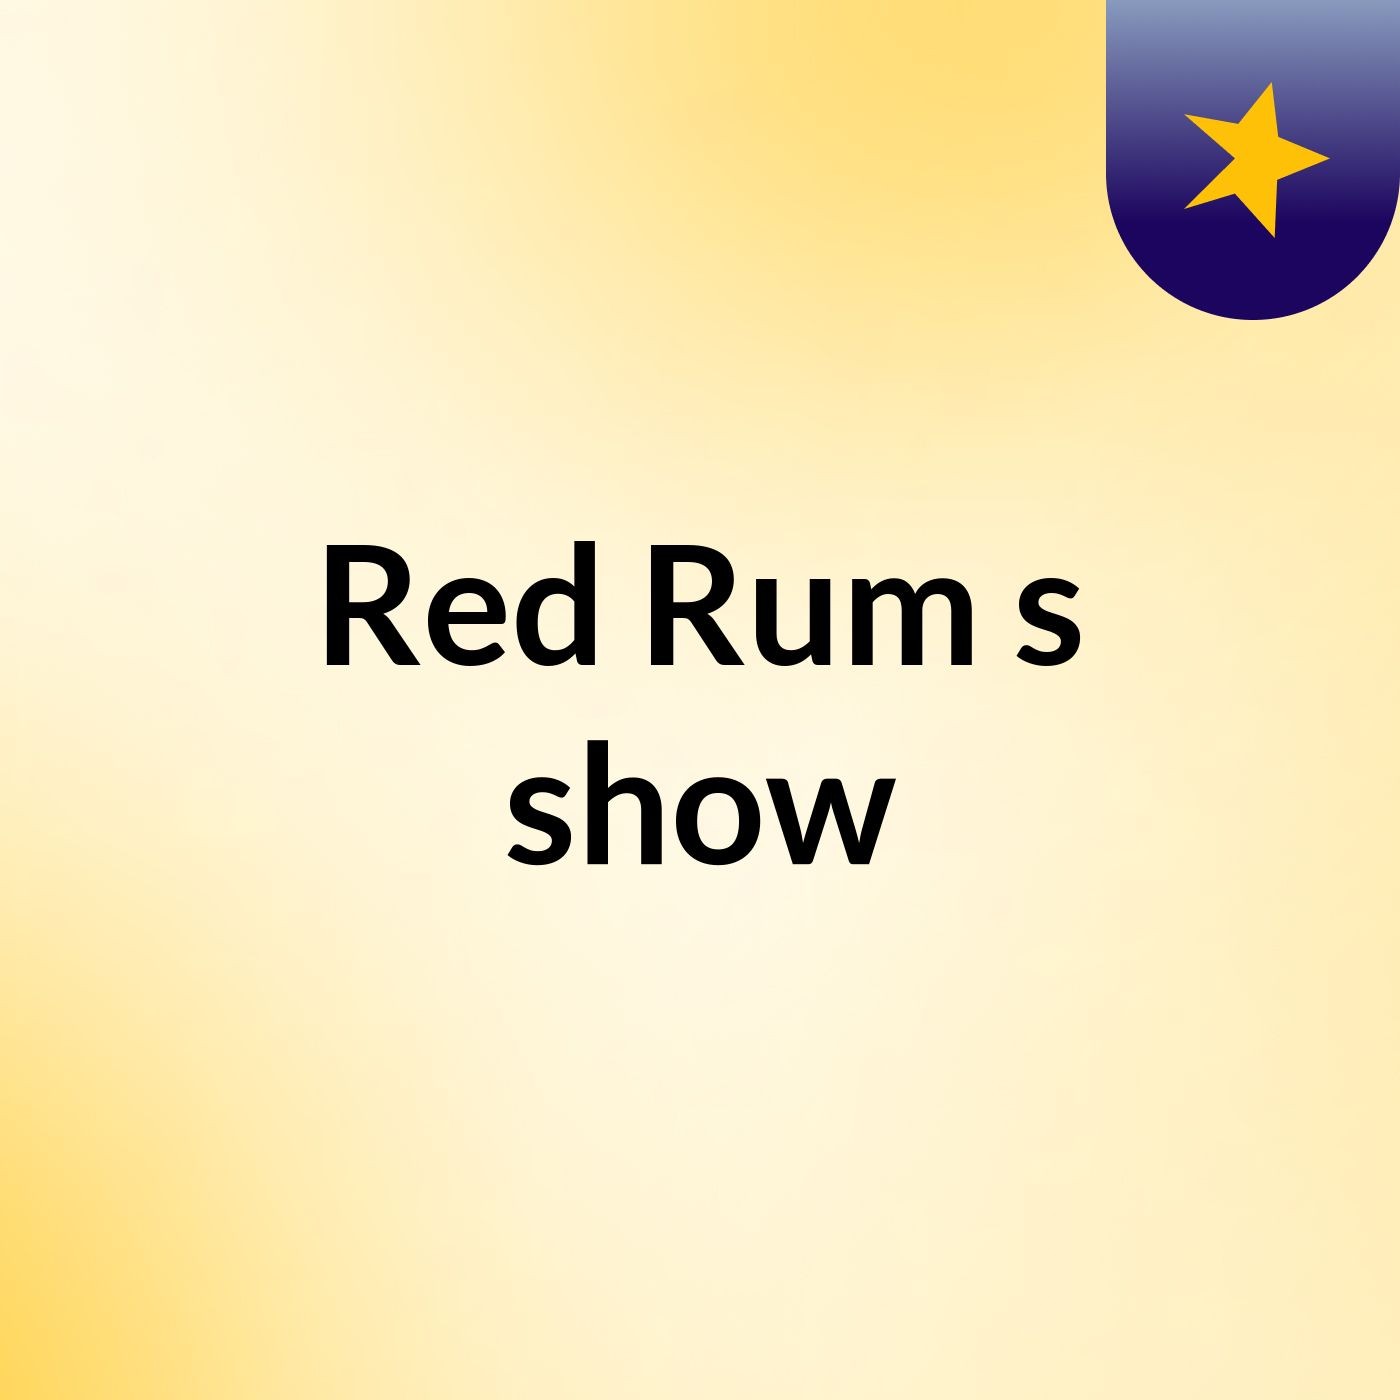 Red Rum's show